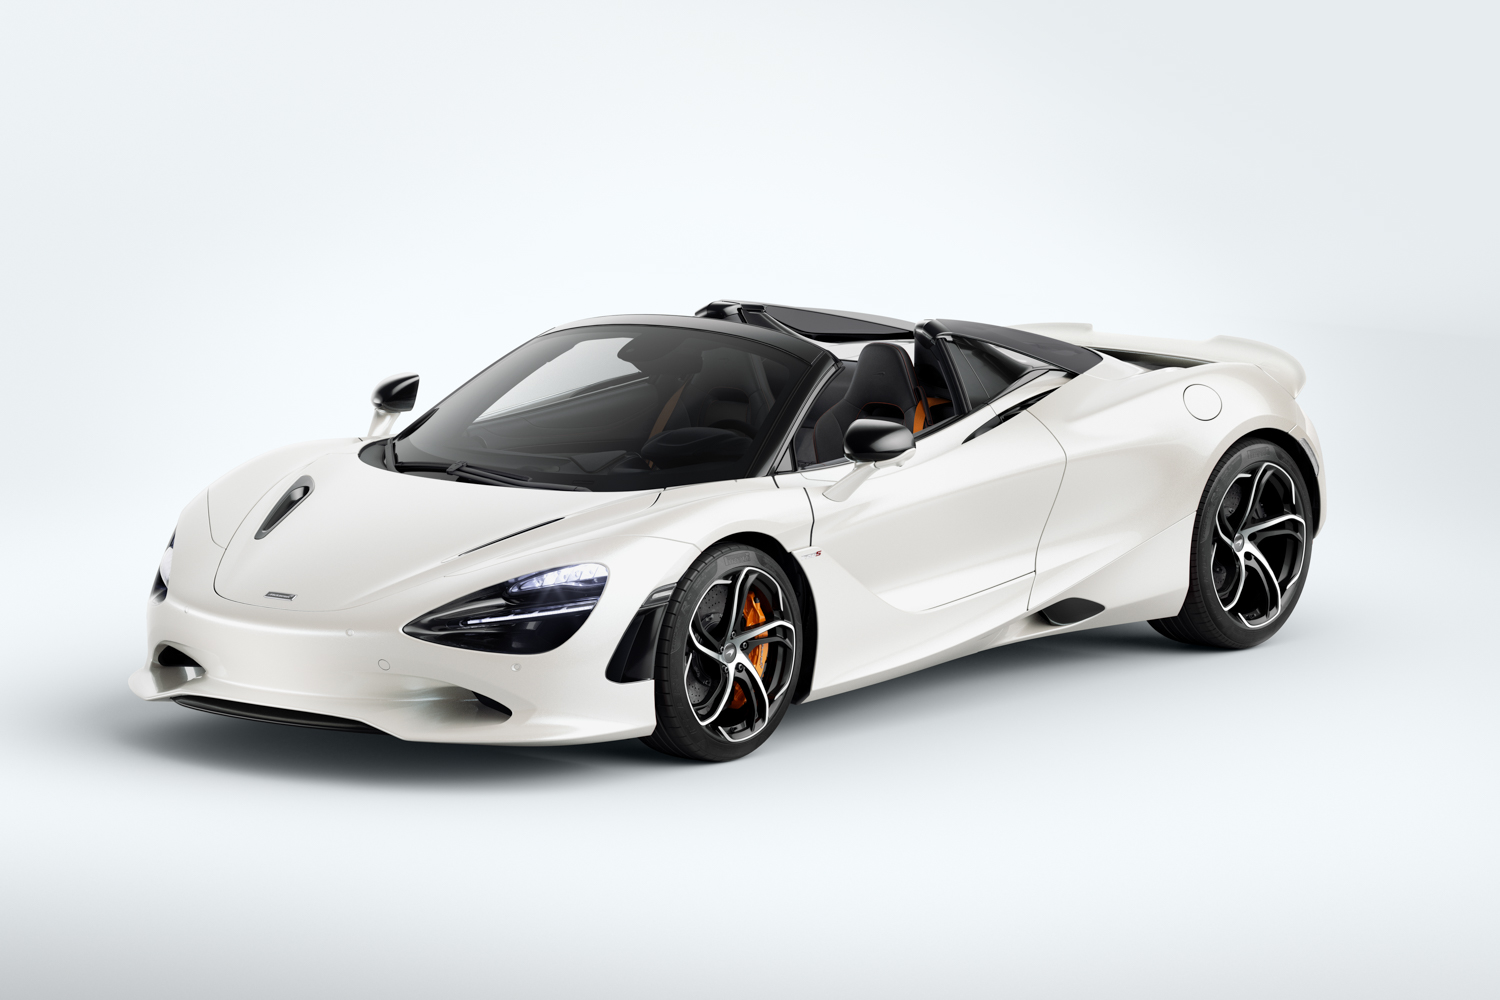 The 750S Is the Lightest and Most Powerful Series-Production